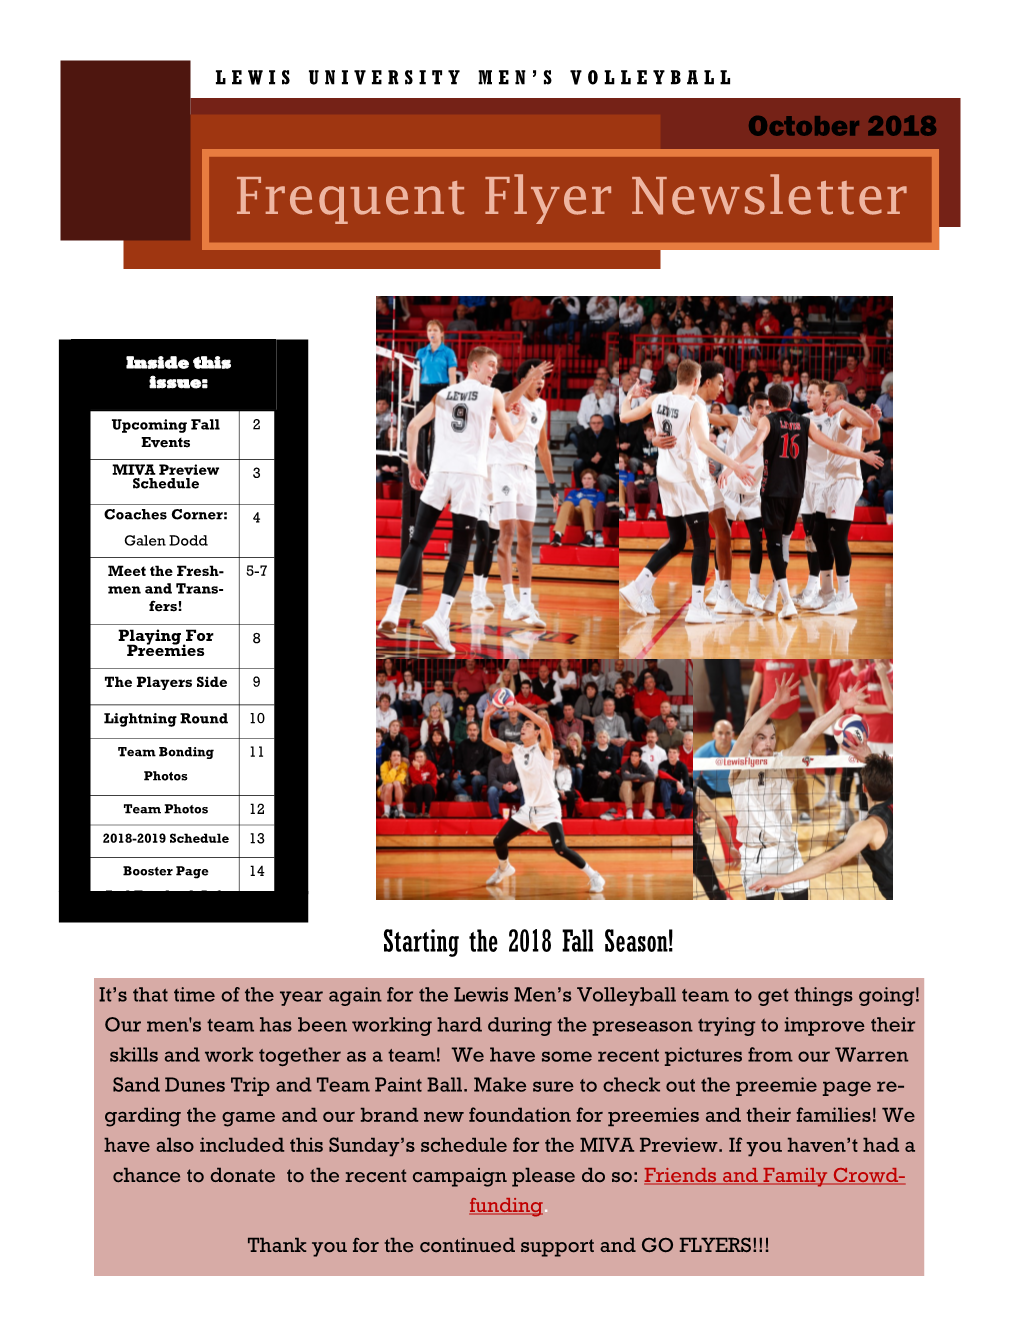 Frequent Flyer Newsletter